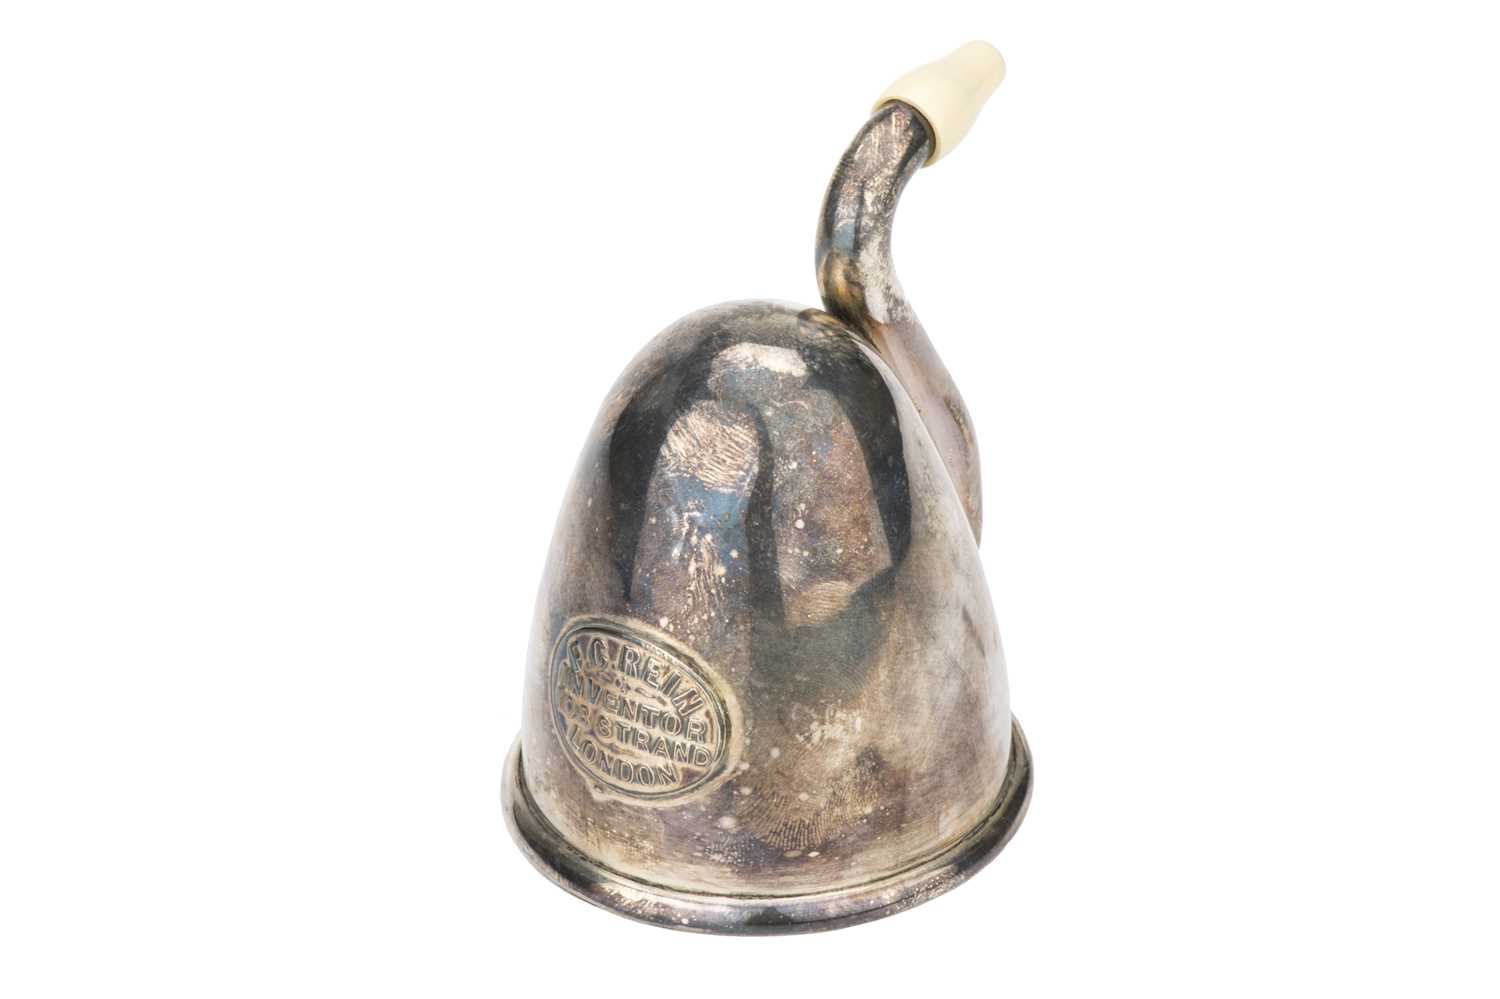 Lot 7 - A Silver-Plated Ear Trumpet by Rein